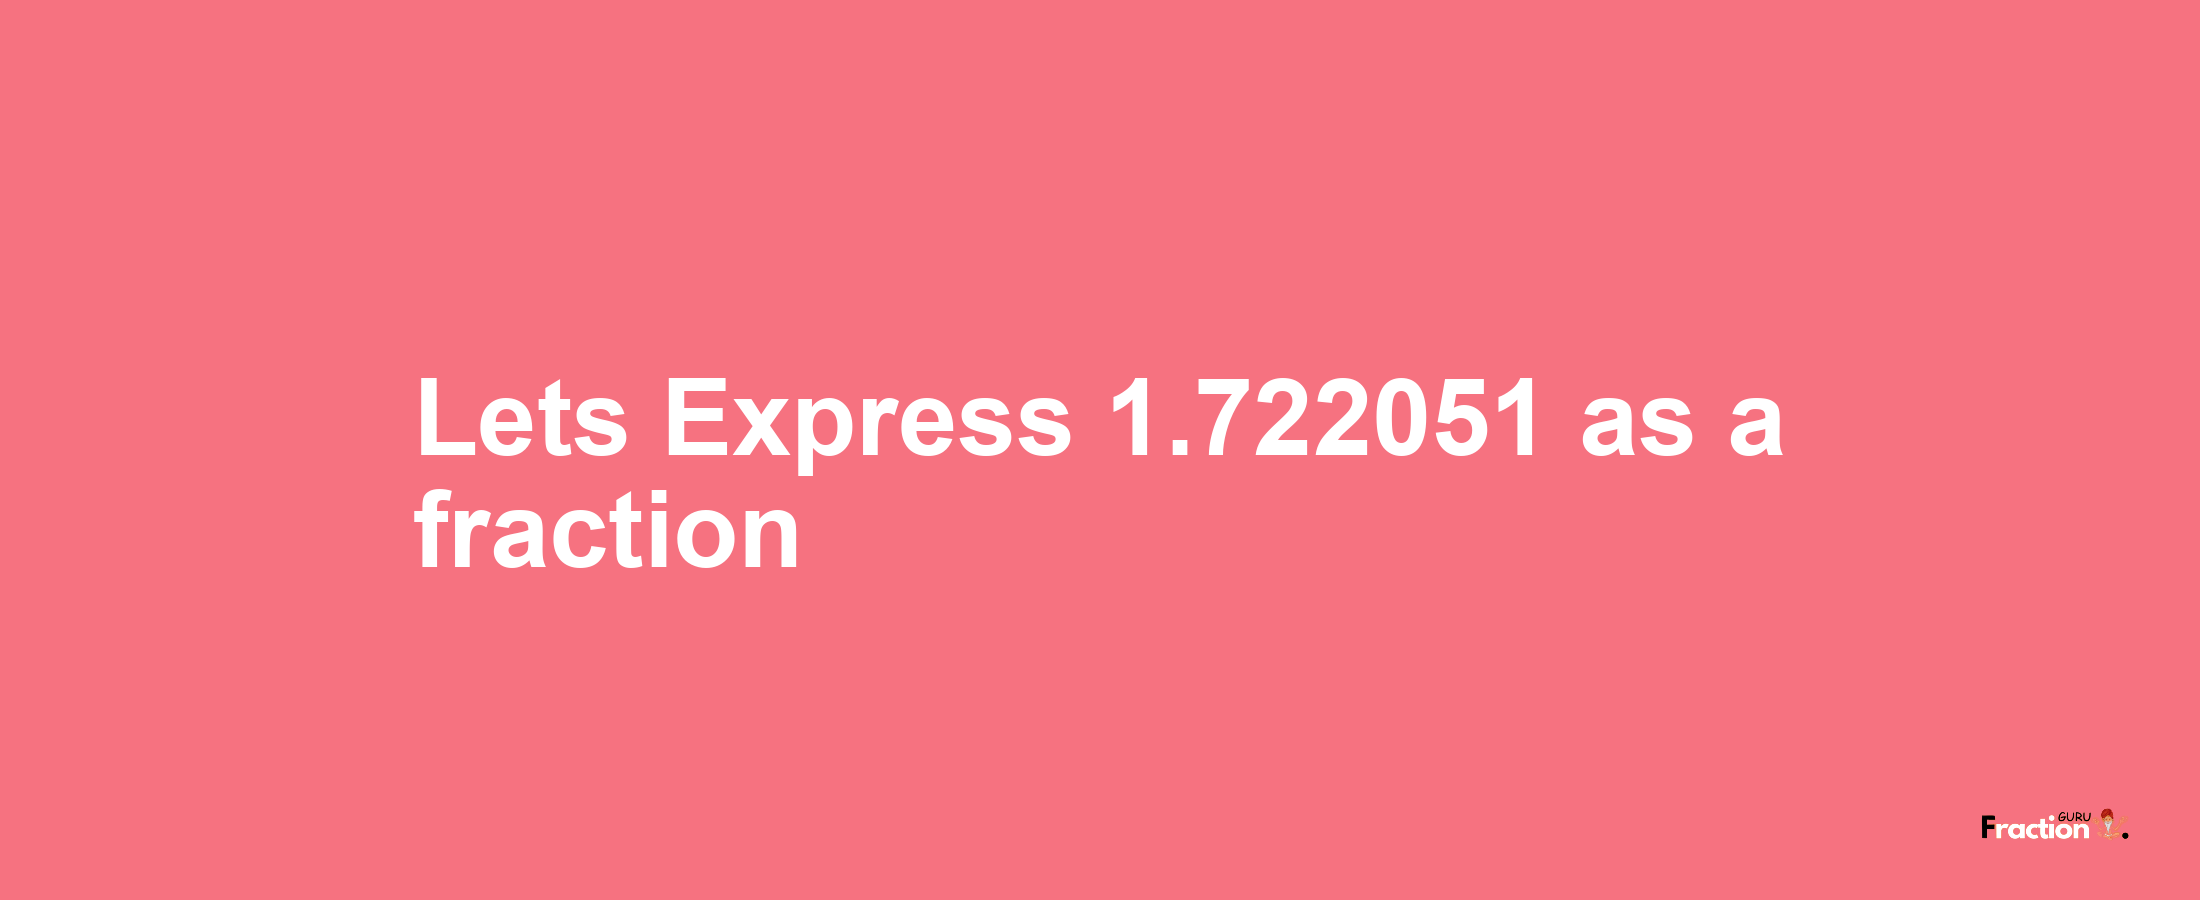 Lets Express 1.722051 as afraction